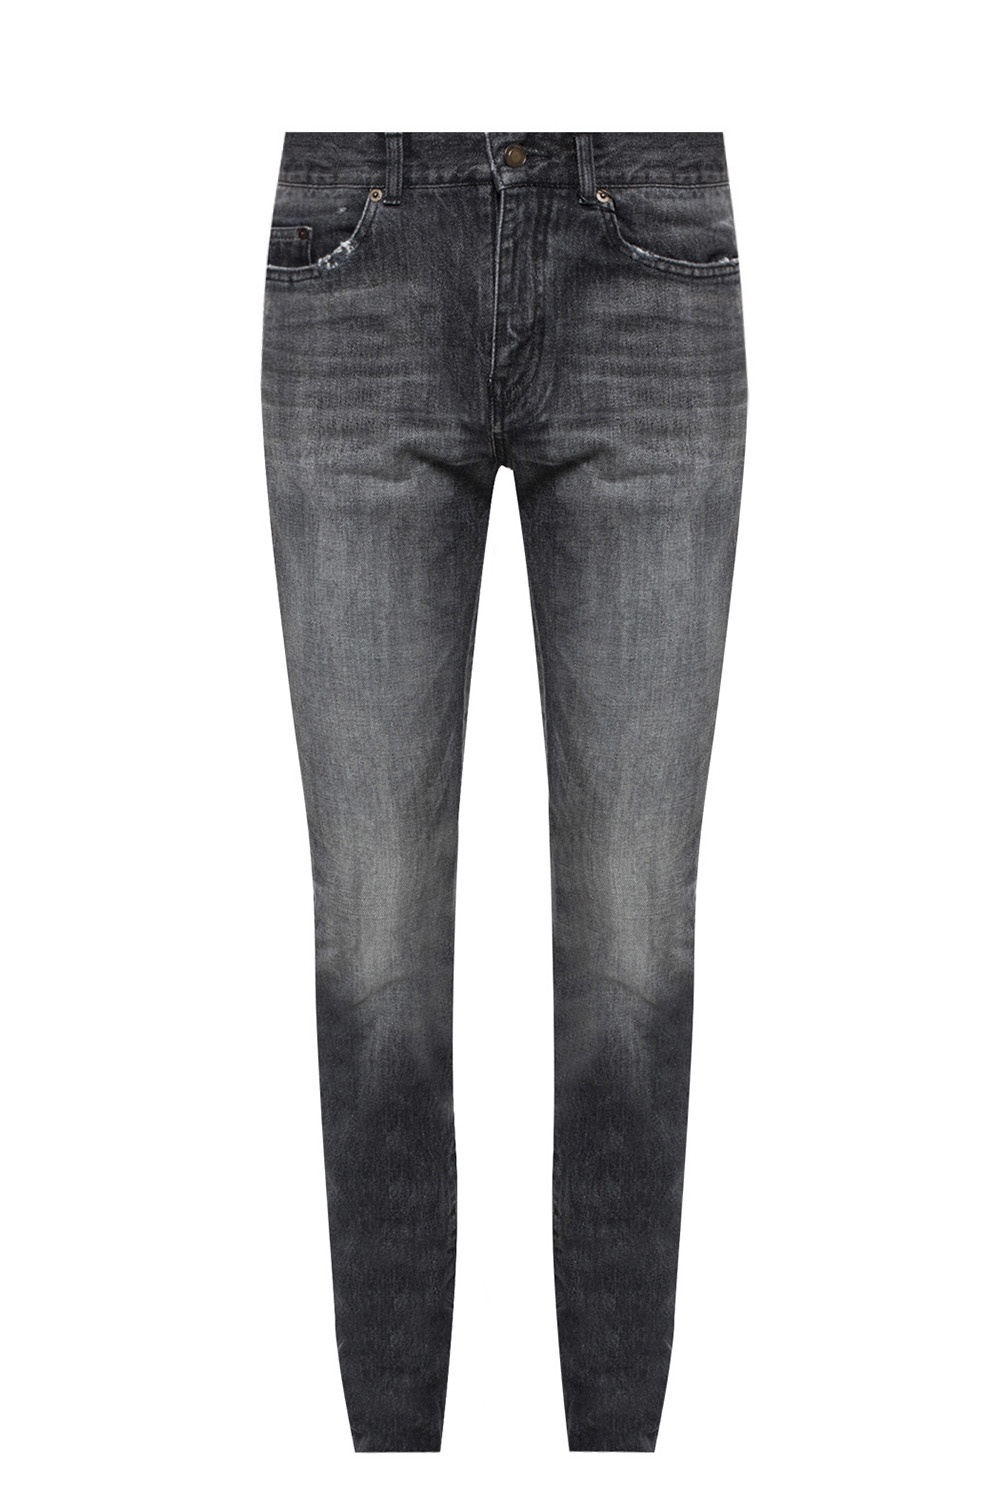 Saint Laurent Jeans with a raw finish | Men's Clothing | Vitkac